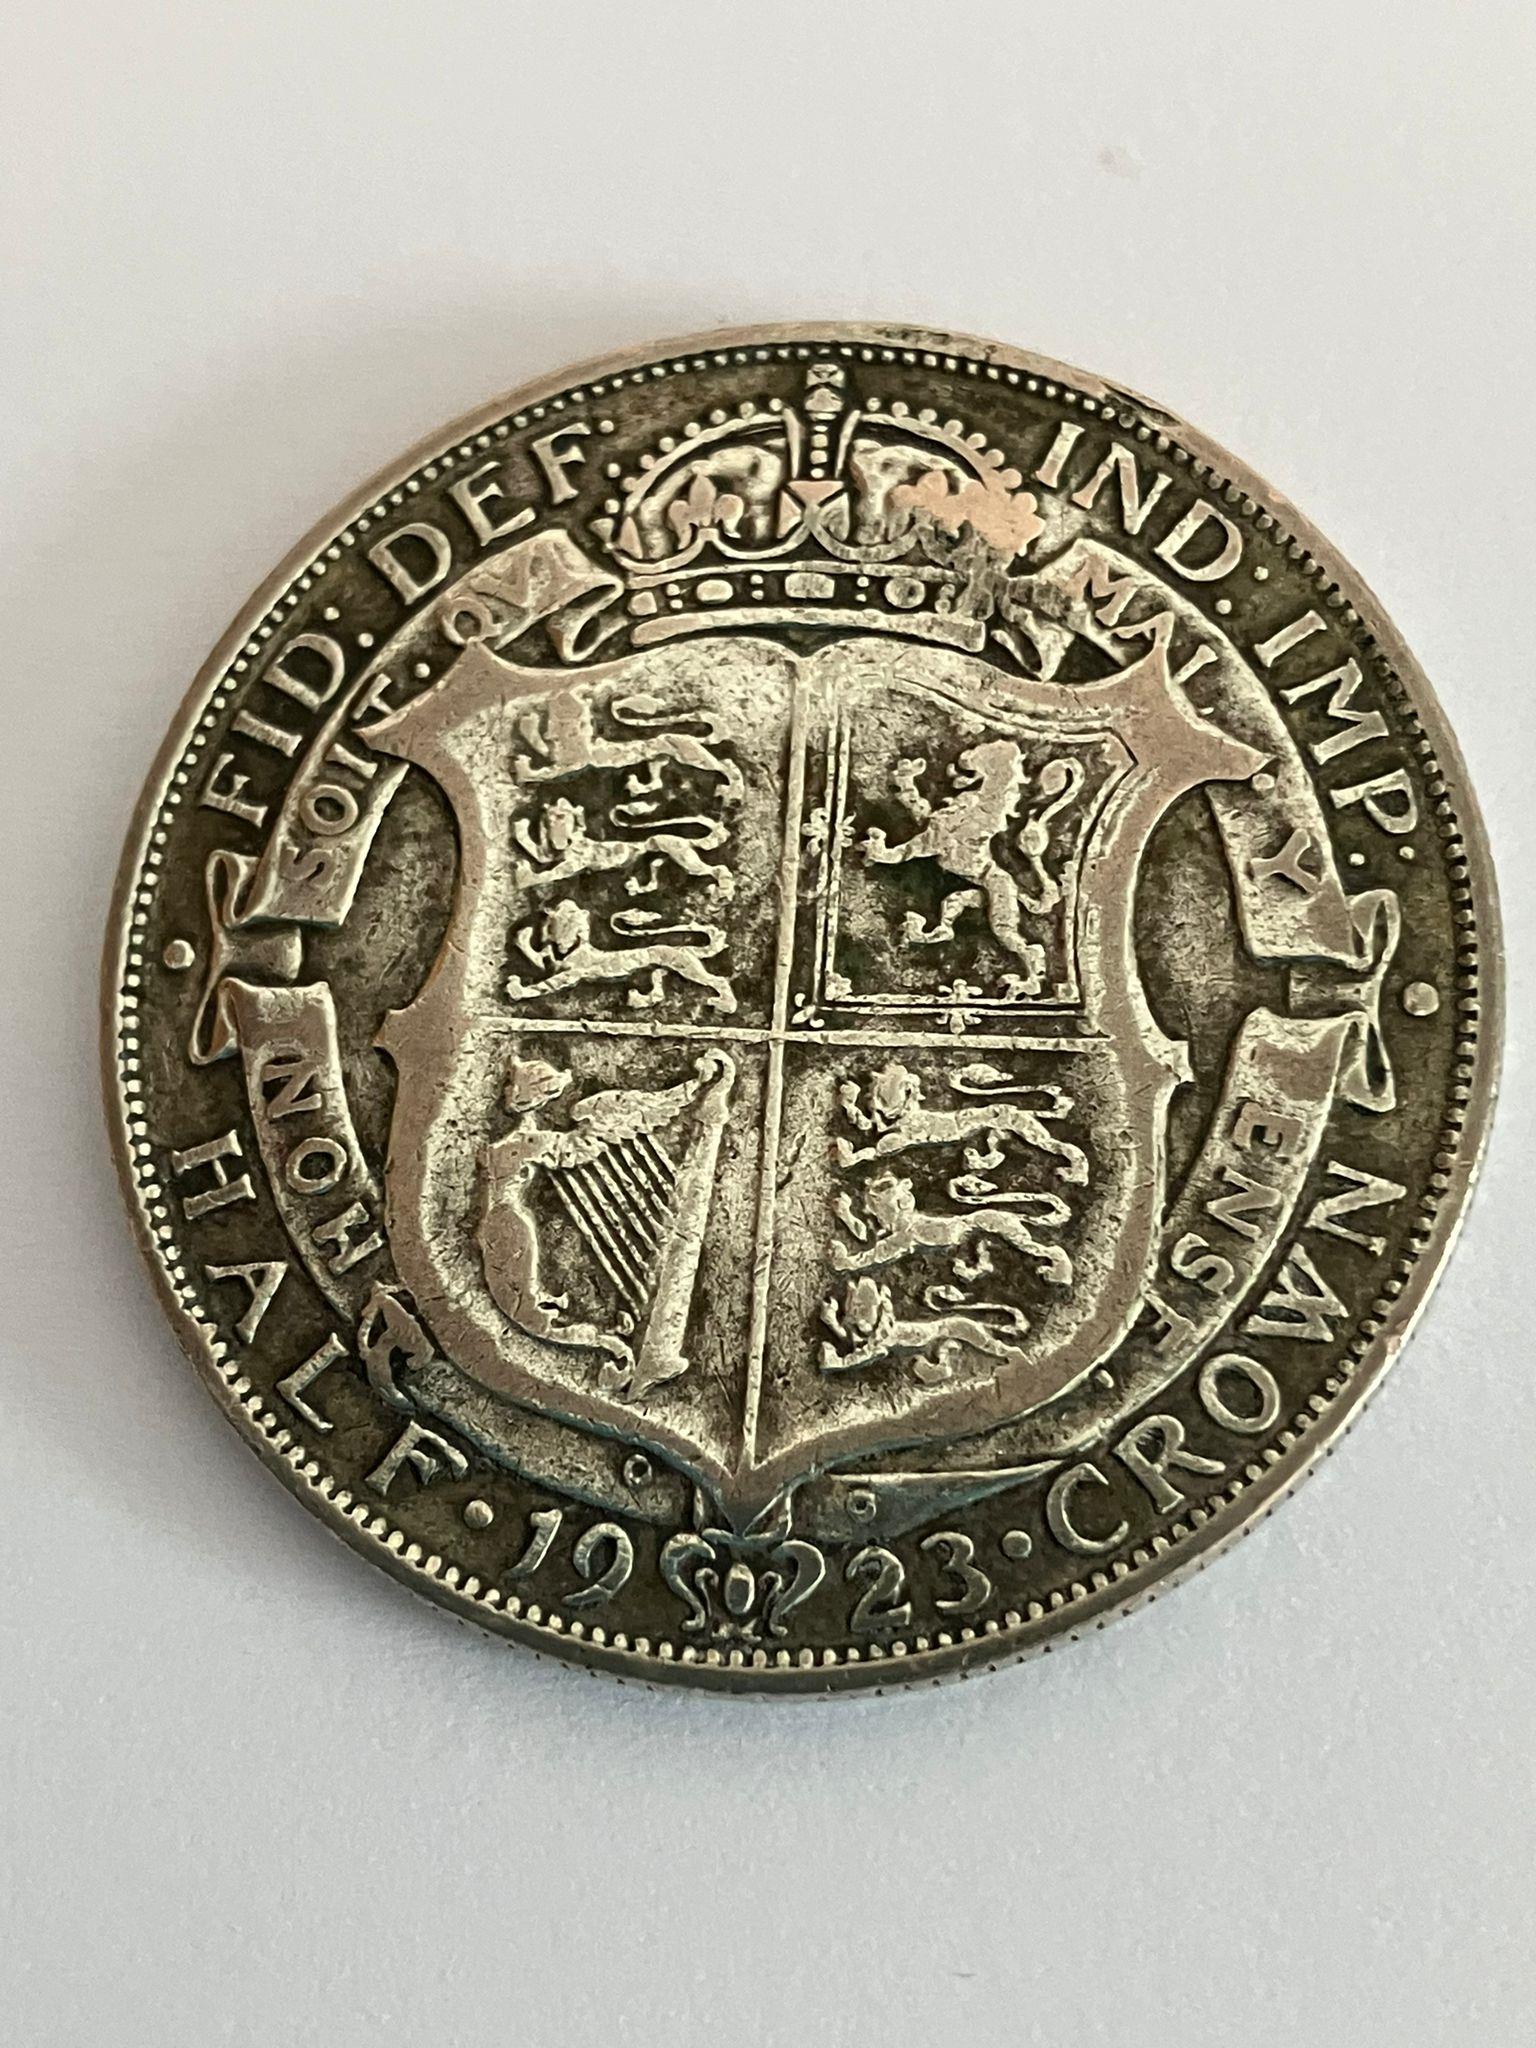 SILVER HALF CROWN 1923 in Extra fine condition, having clear detail and raised definition. - Image 3 of 3